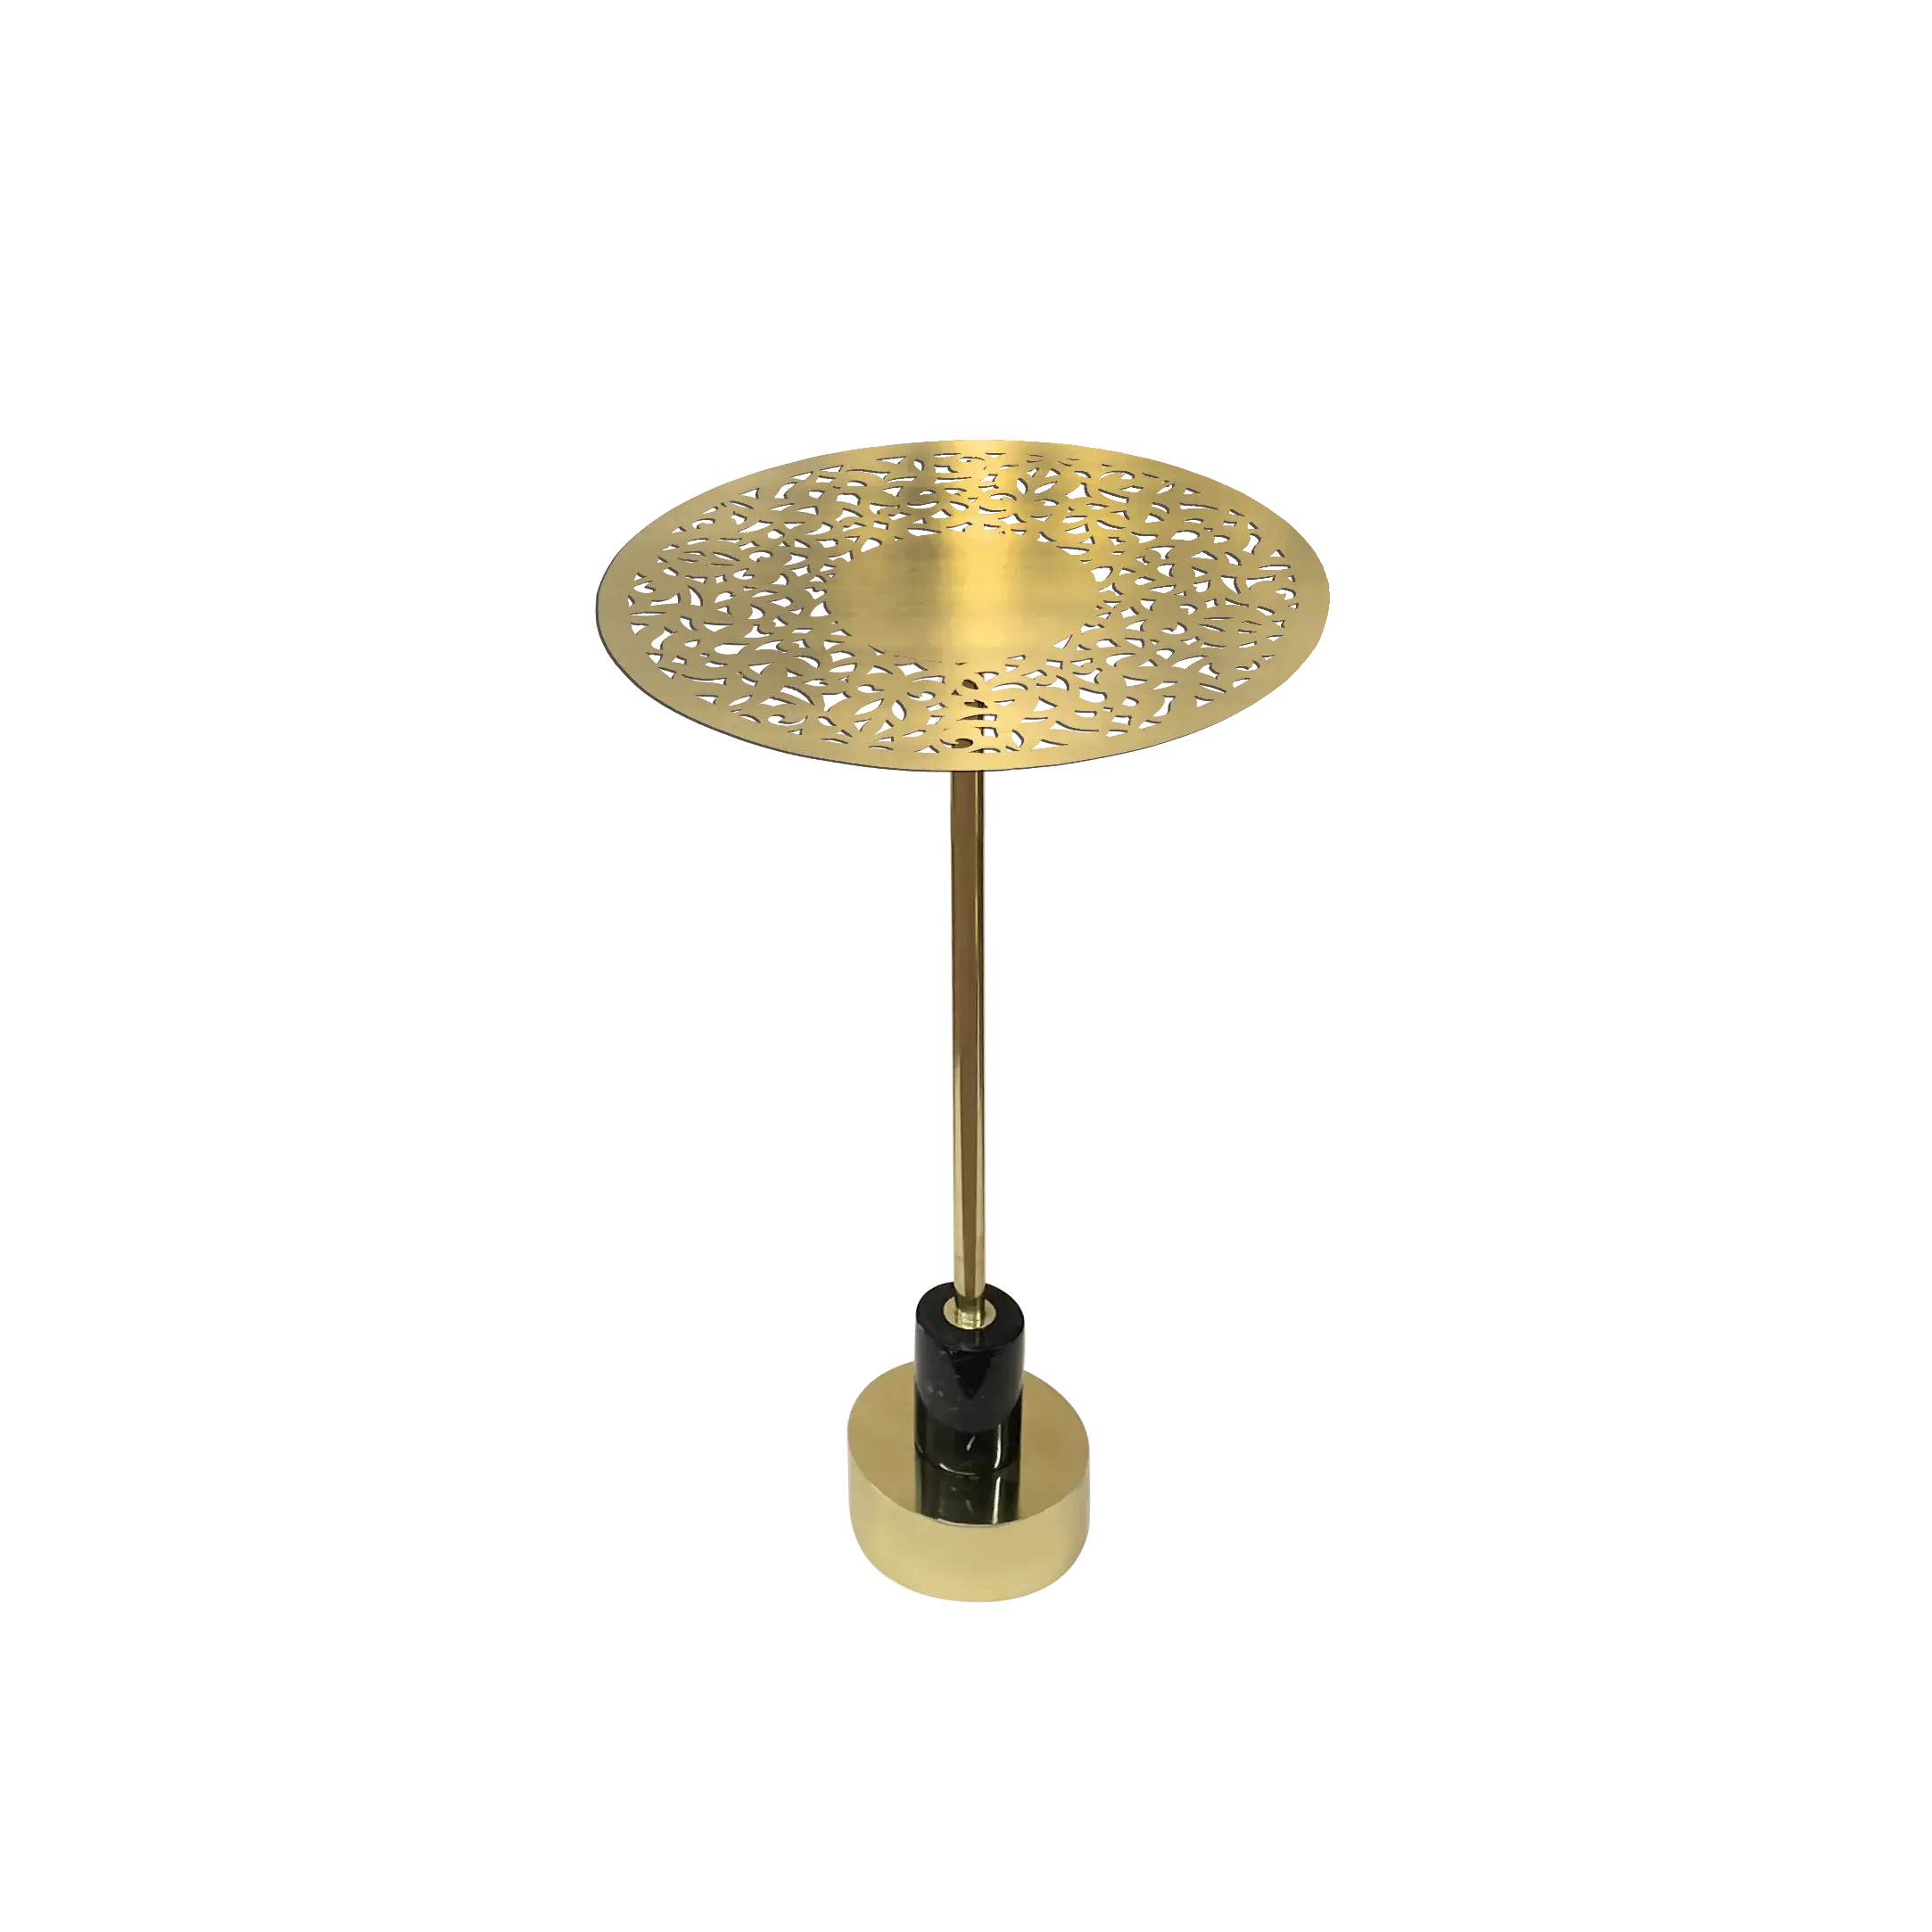 Dounia home Side table in Polished brass   made of Brass and marble, Model: Riad